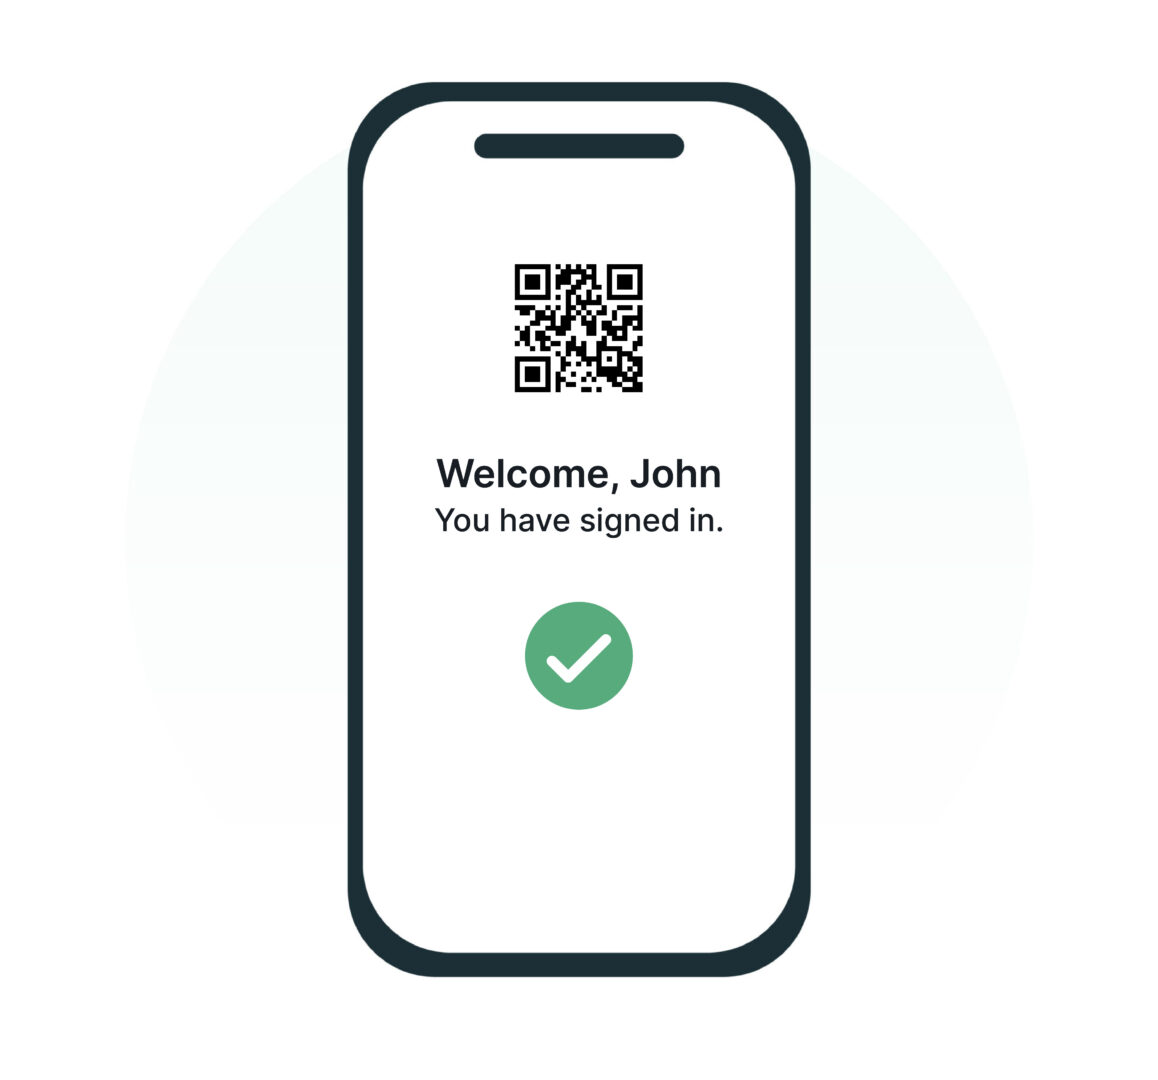 mobile-sign-in-provisit-1158x1080